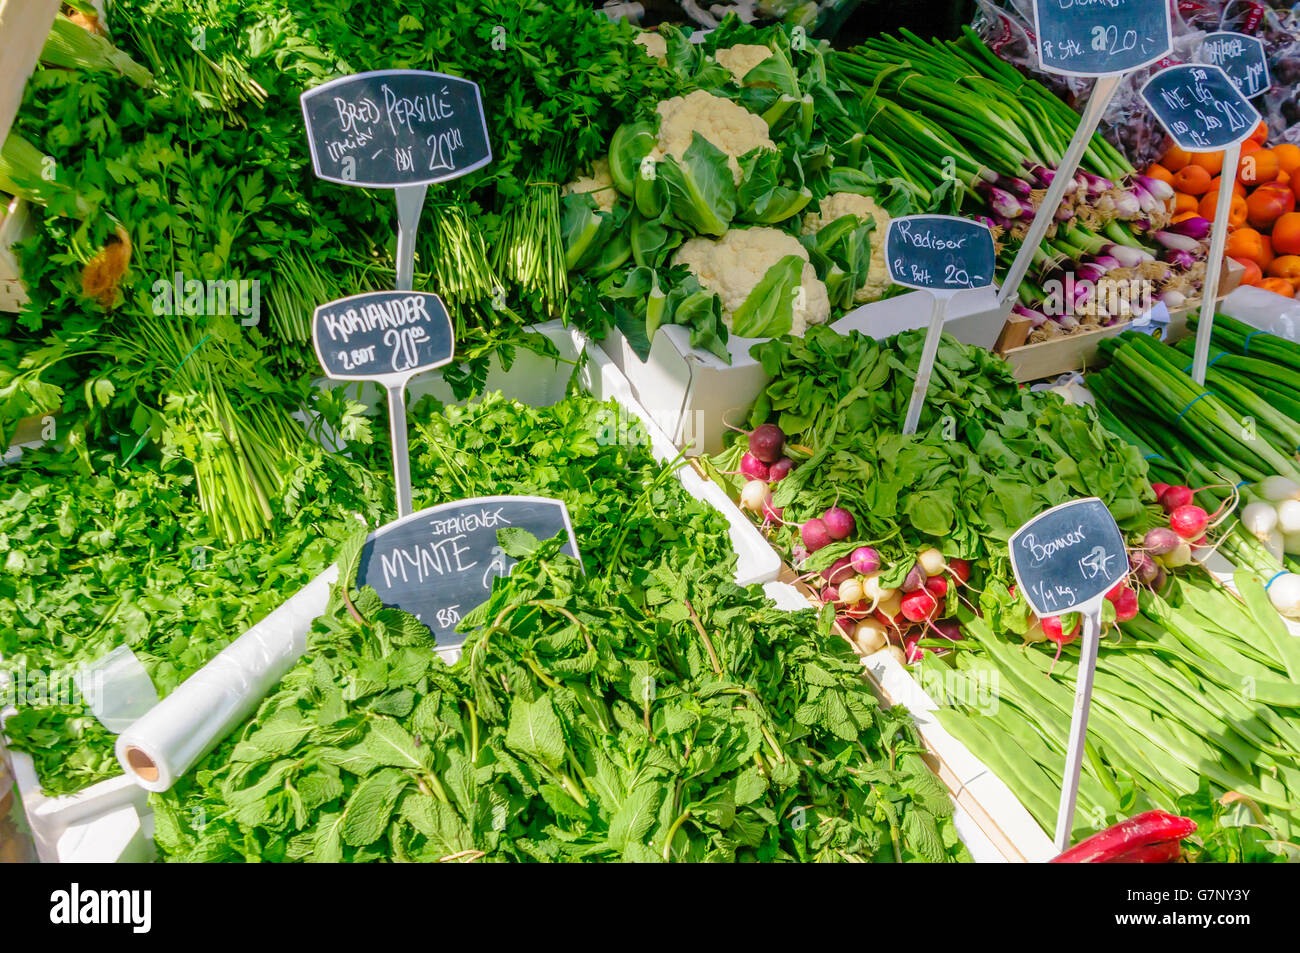 Salad vegetables, cauliflower and herbs for sale at a Danish market stall. Stock Photo